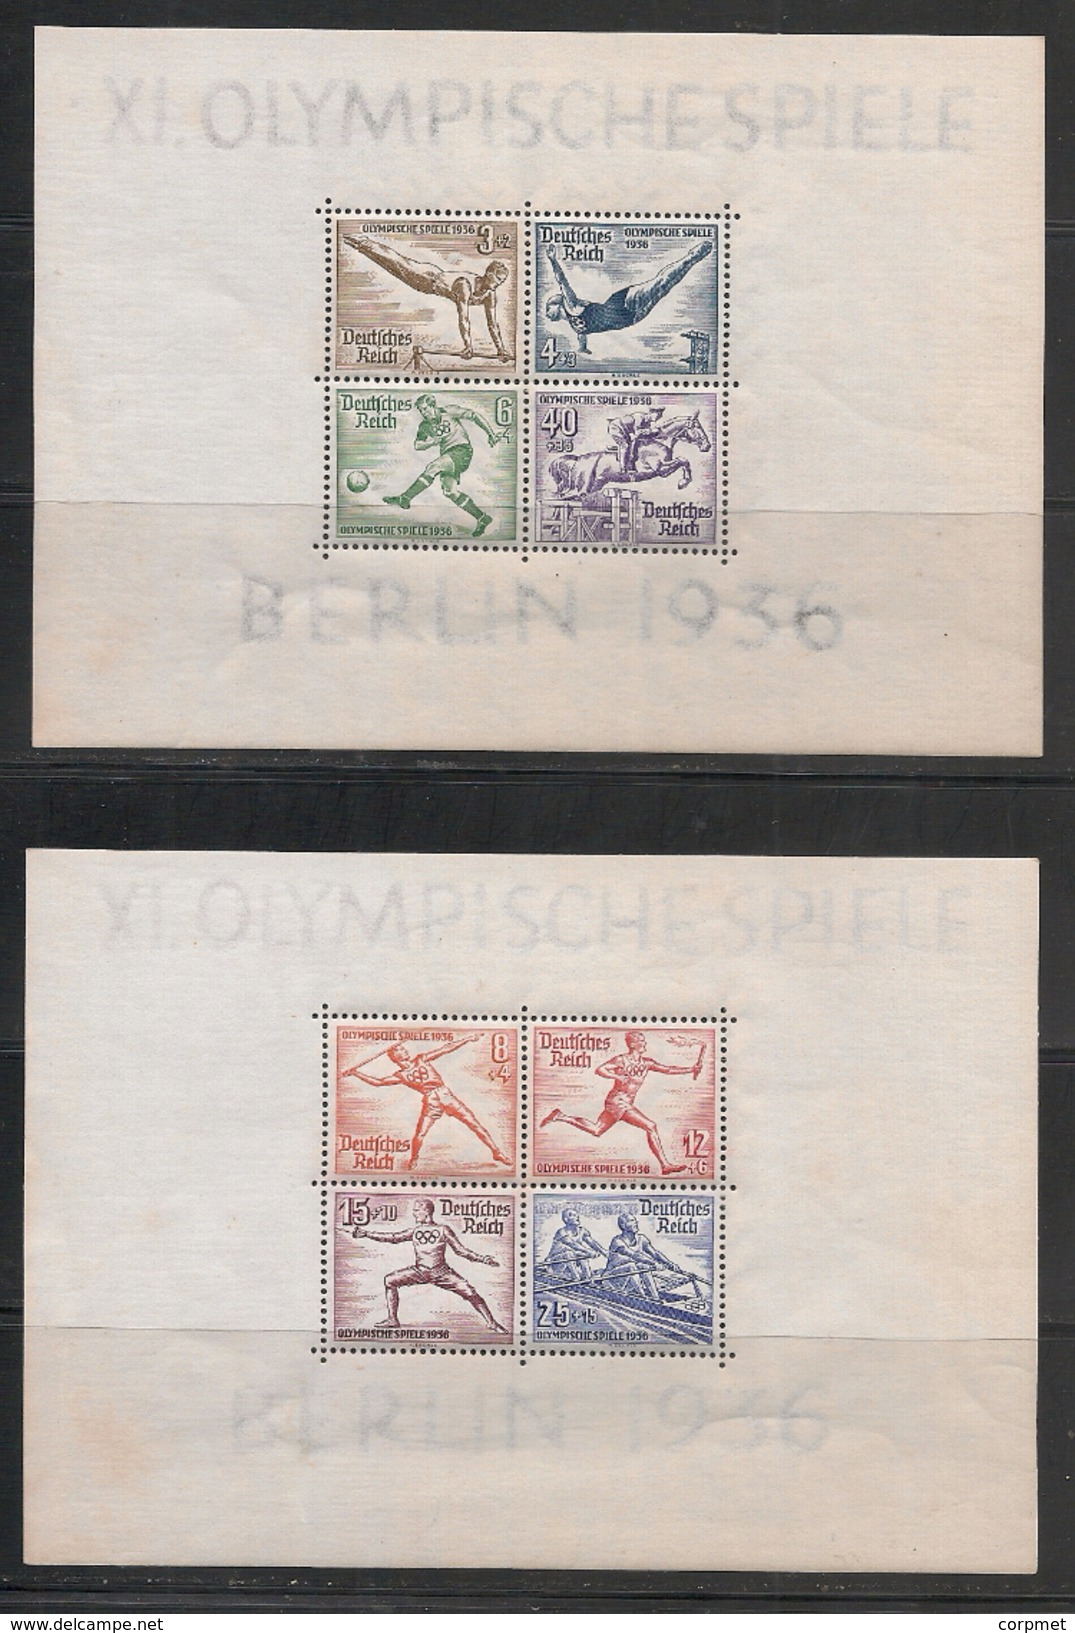 OLYMPIC GAMES - JEUX OLYMPIQUES - BERLIN 1936 - SOUVENIR SHEETS - Yvert # Bloc 4 -5 - ** MNH - Sommer 1936: Berlin